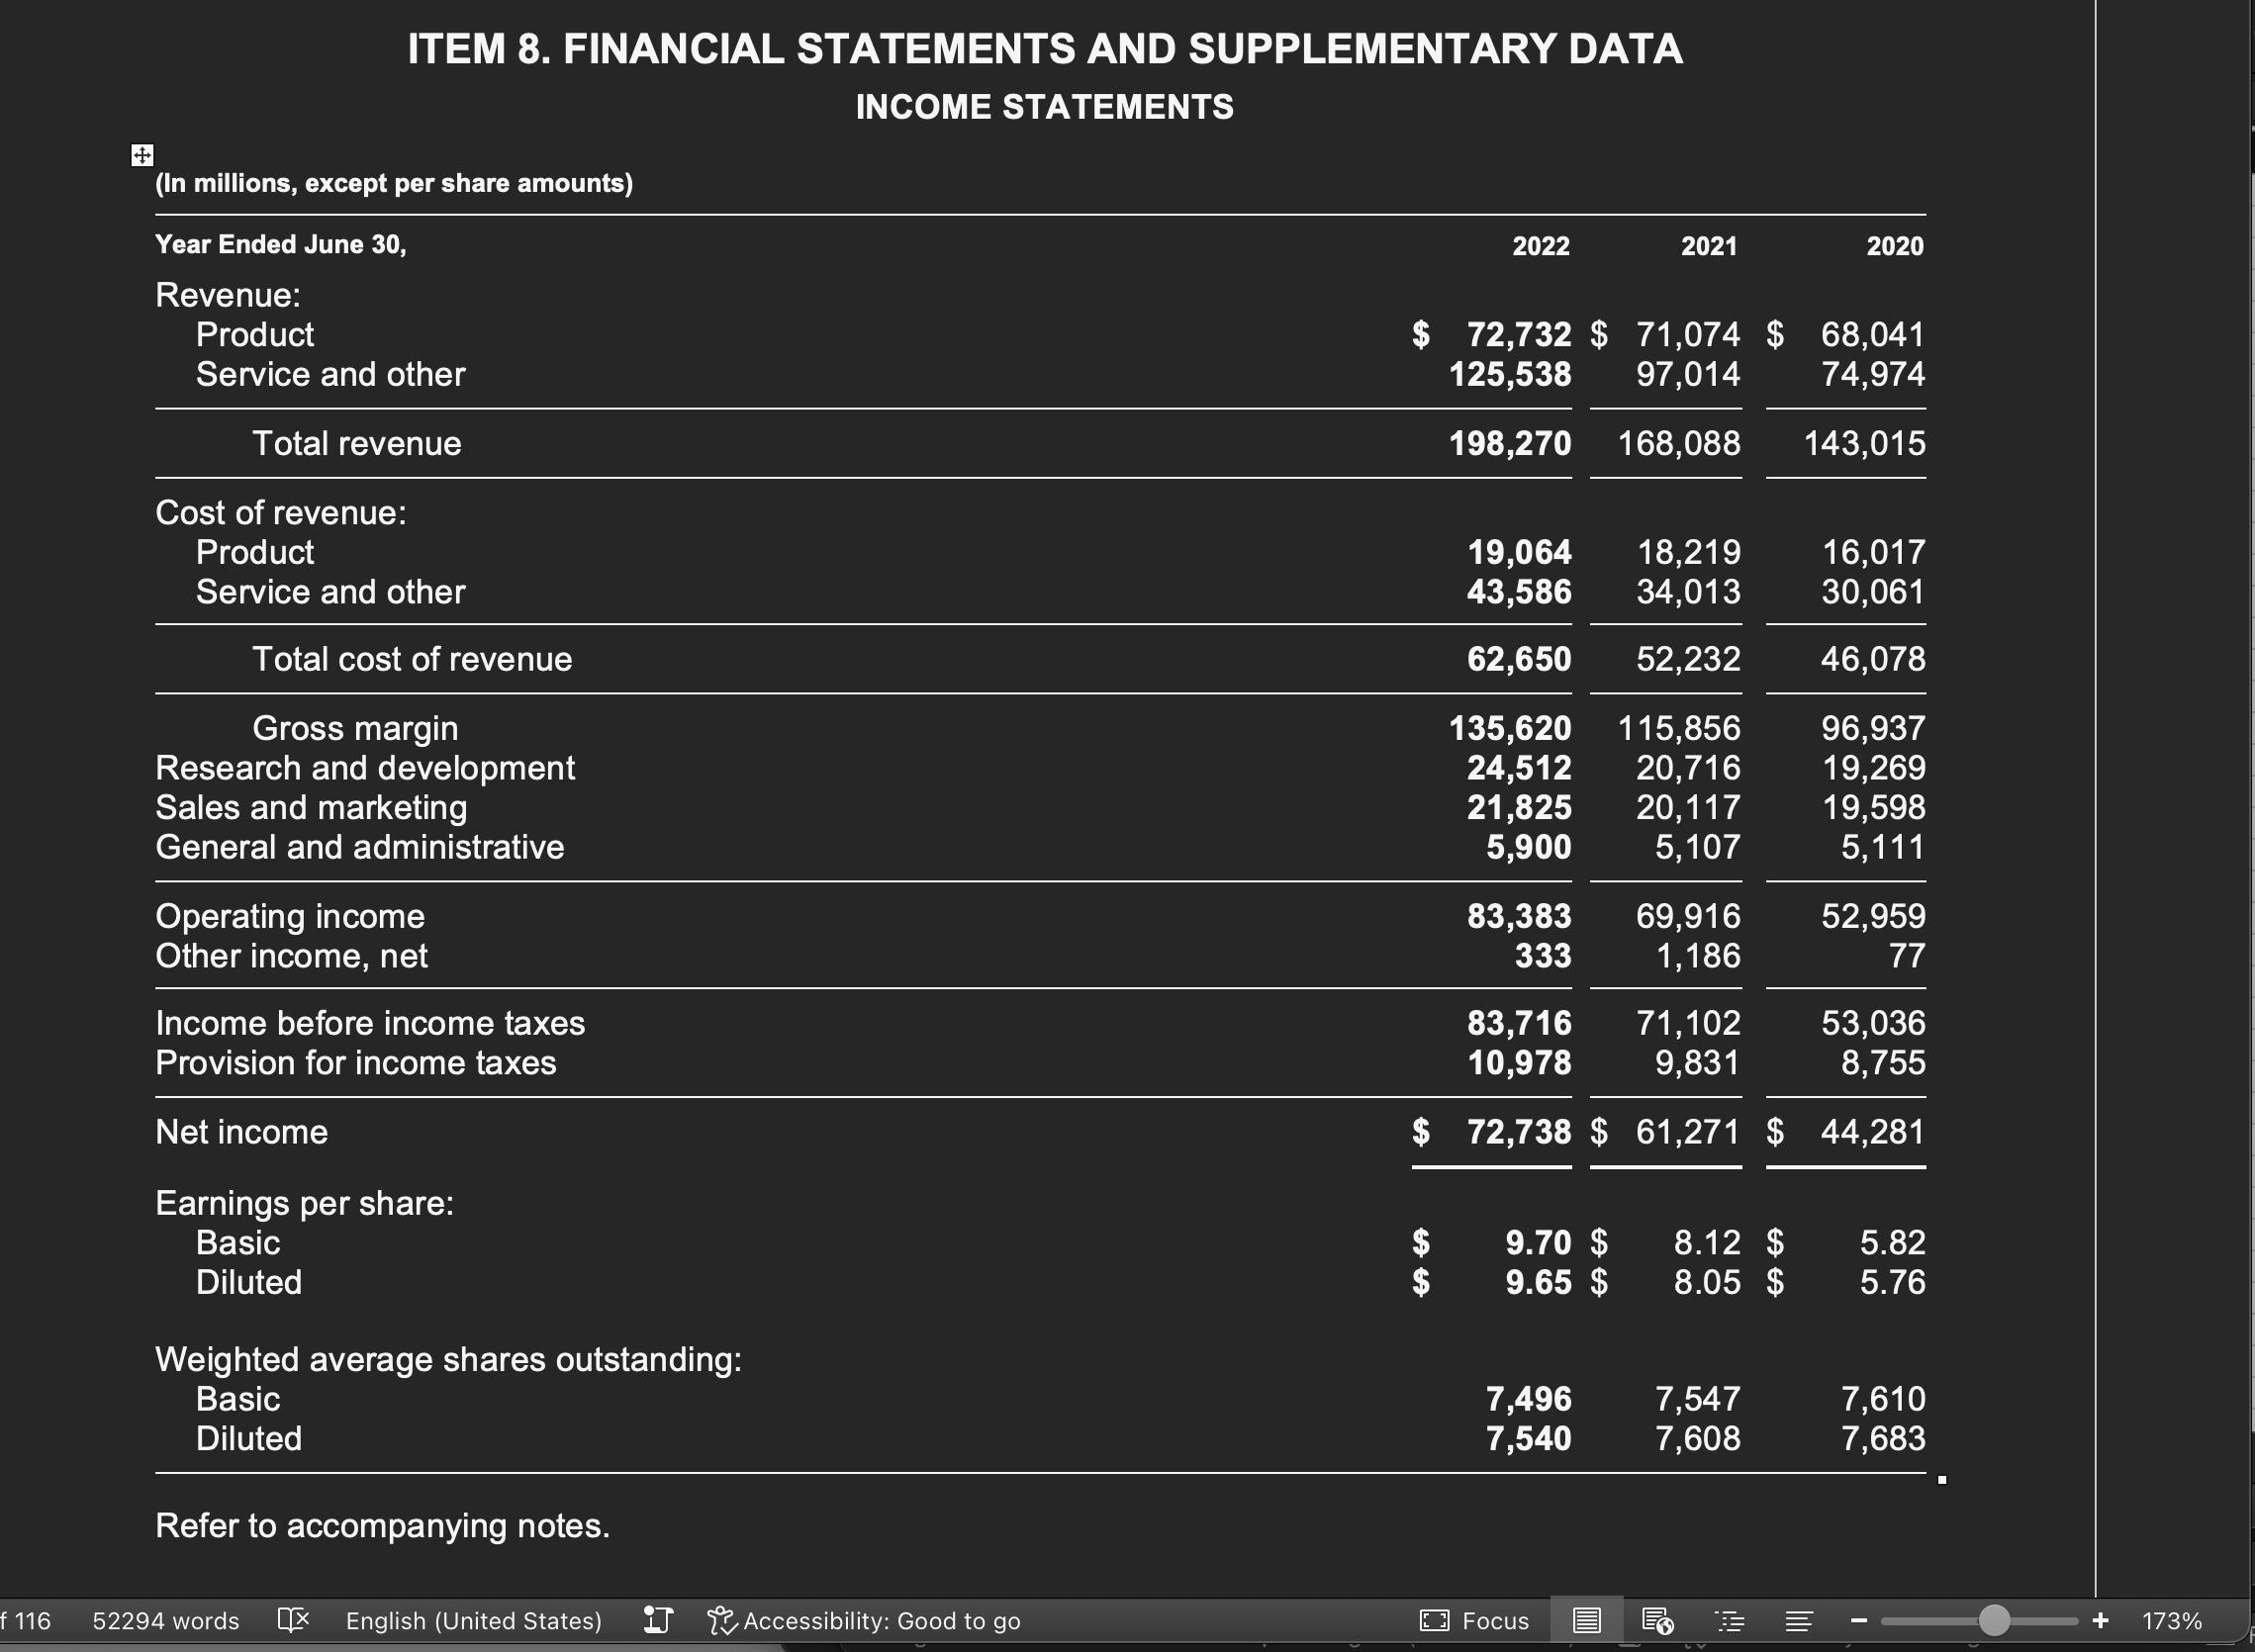 f 116 (In millions, except per share amounts) Year Ended June 30, Revenue: ITEM 8. FINANCIAL STATEMENTS AND